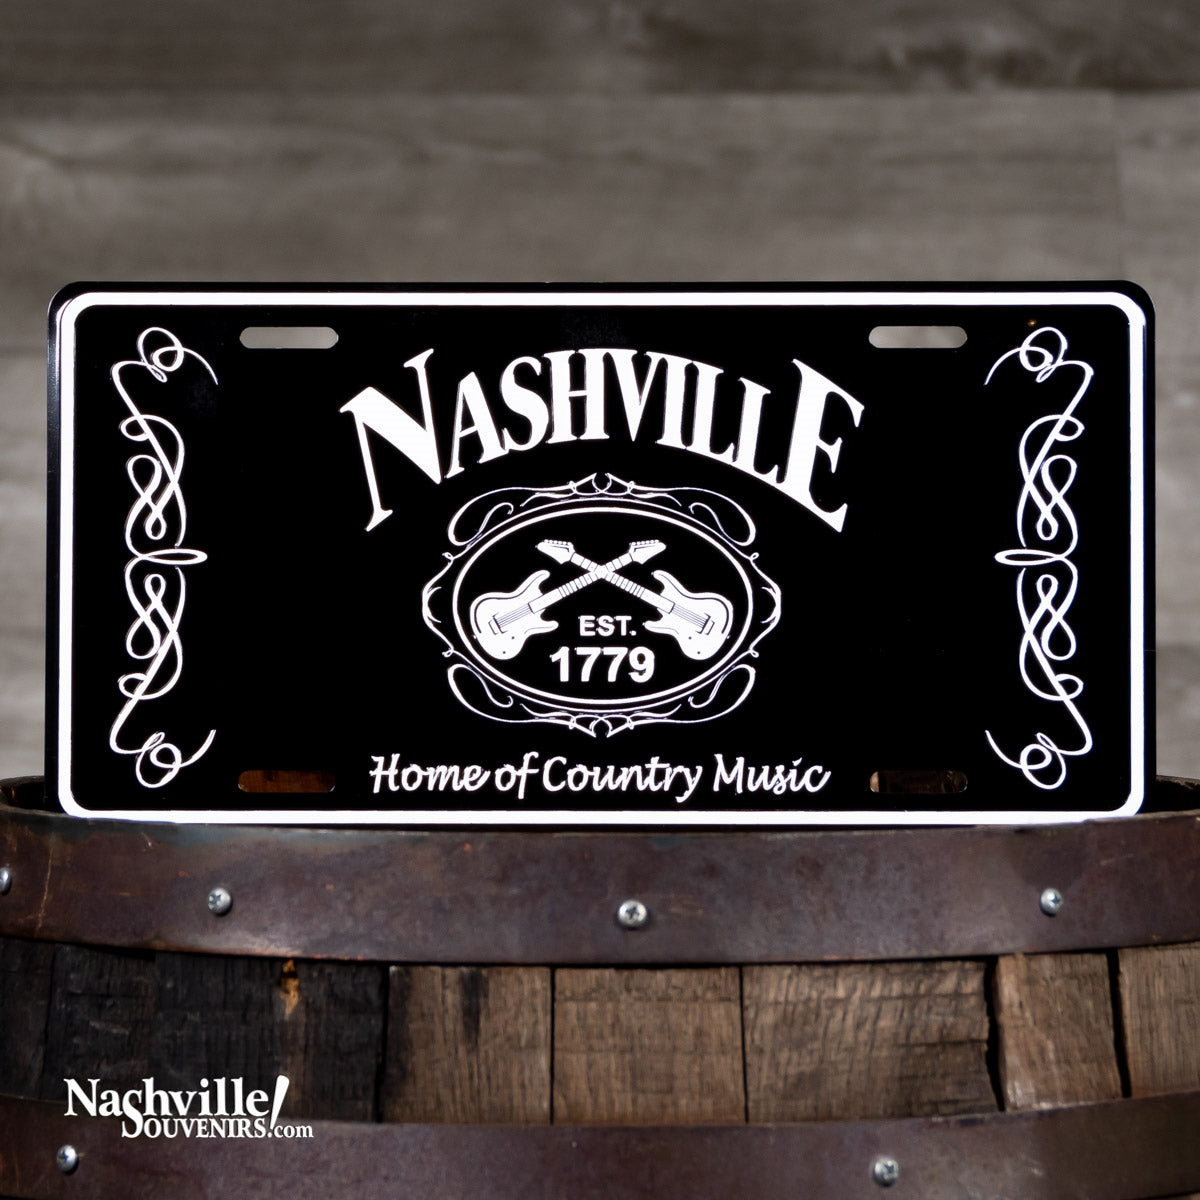 Nashville "Home of Country Music" License Plate